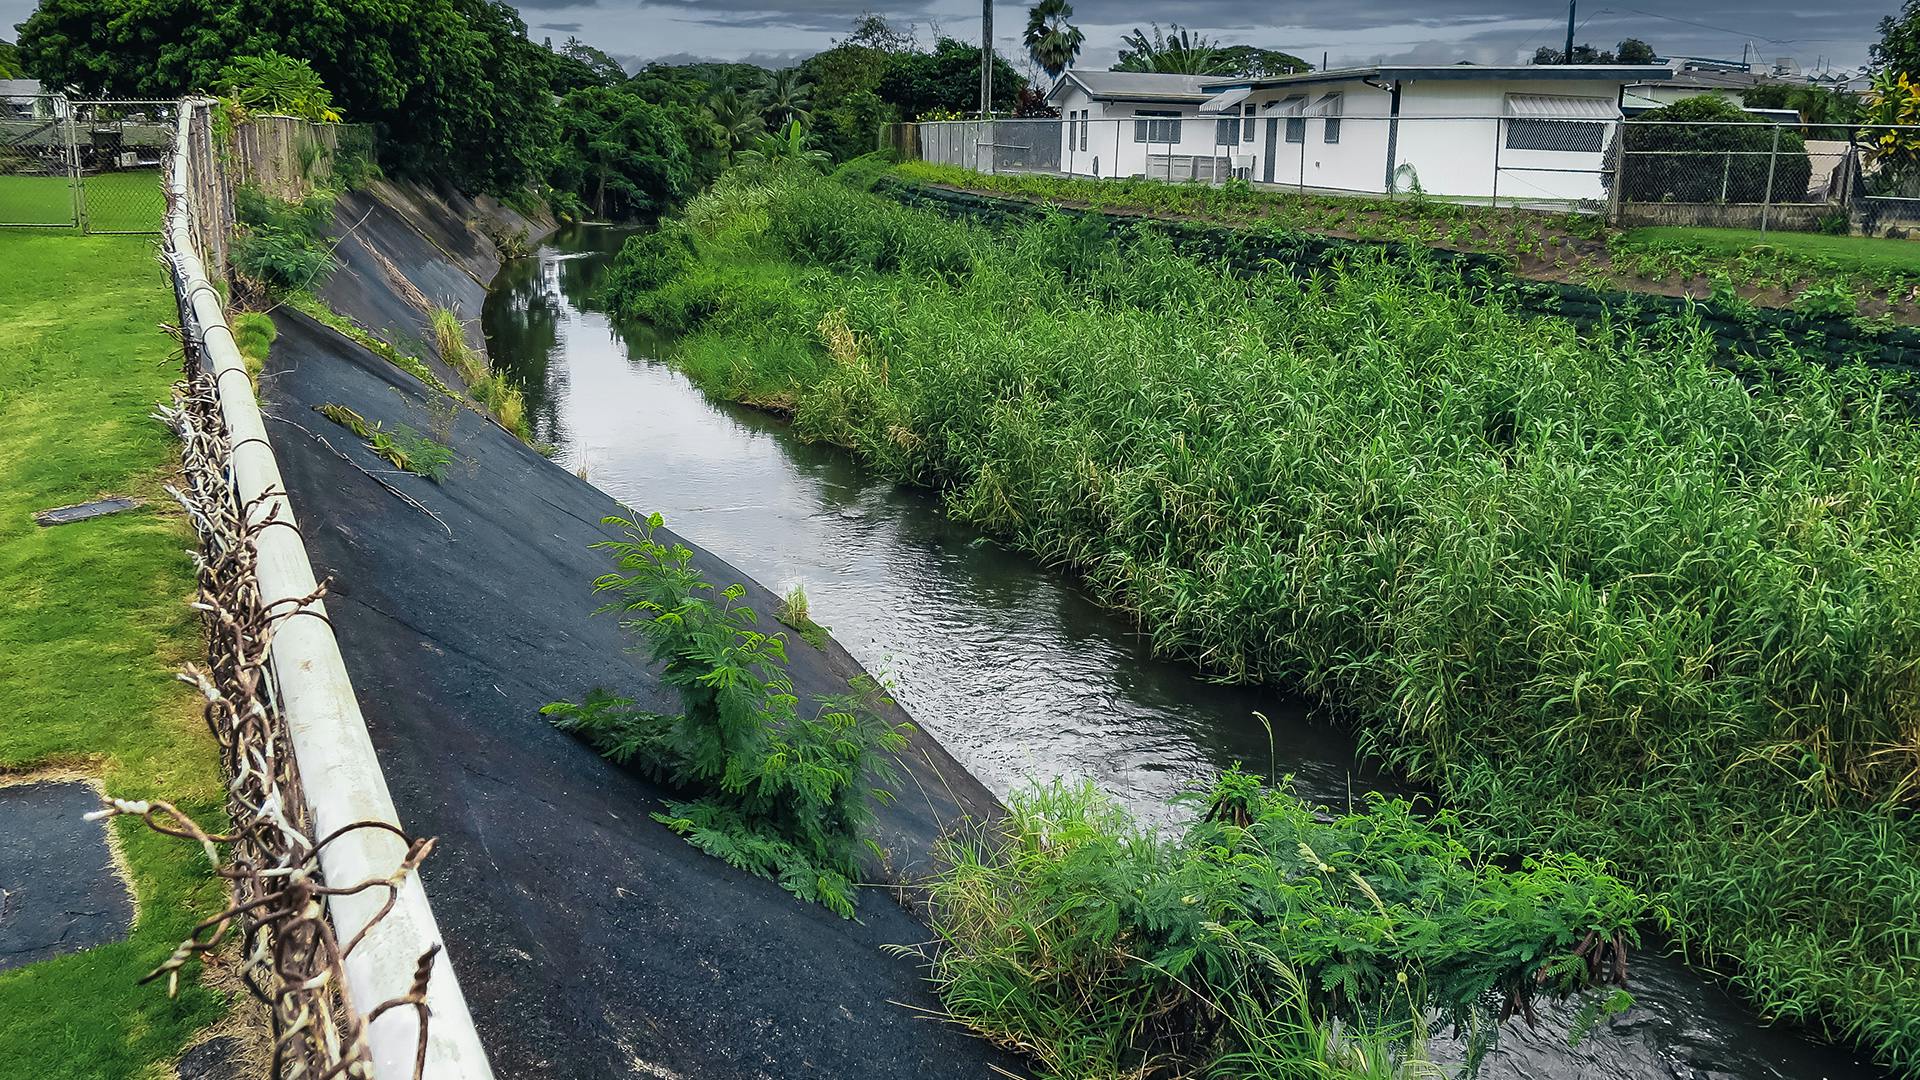 Innovative stabilization of Kaneohe Stream in Hawaii using PROPEX Pyrawall for property protection and long-term flood mitigation.